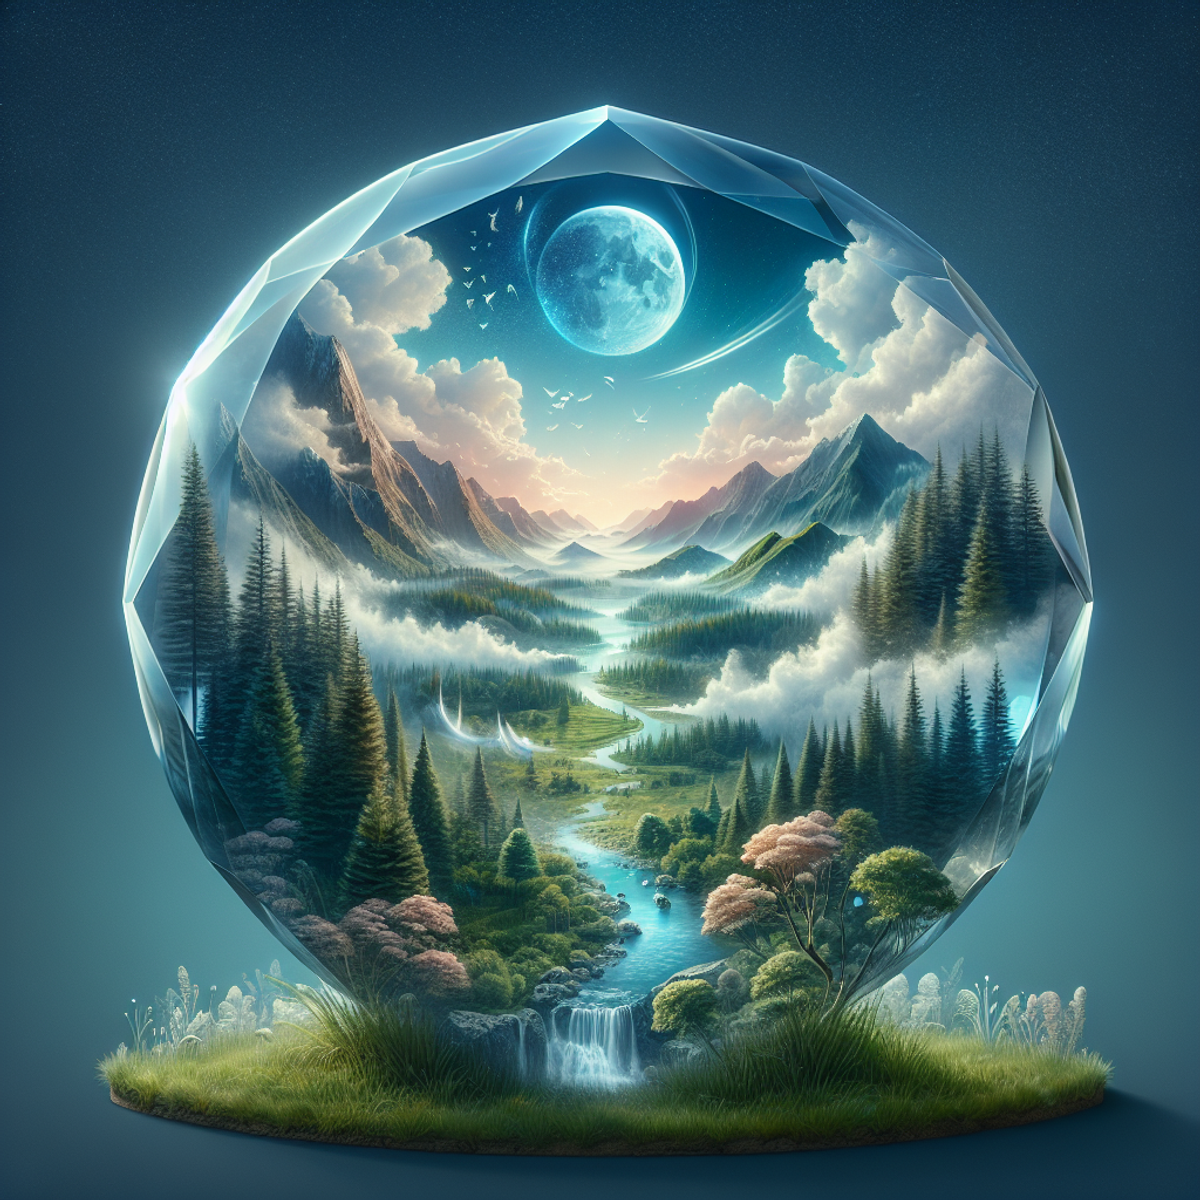 A crystal with a serene river, lush forests, ethereal clouds, and majestic mountains inside.